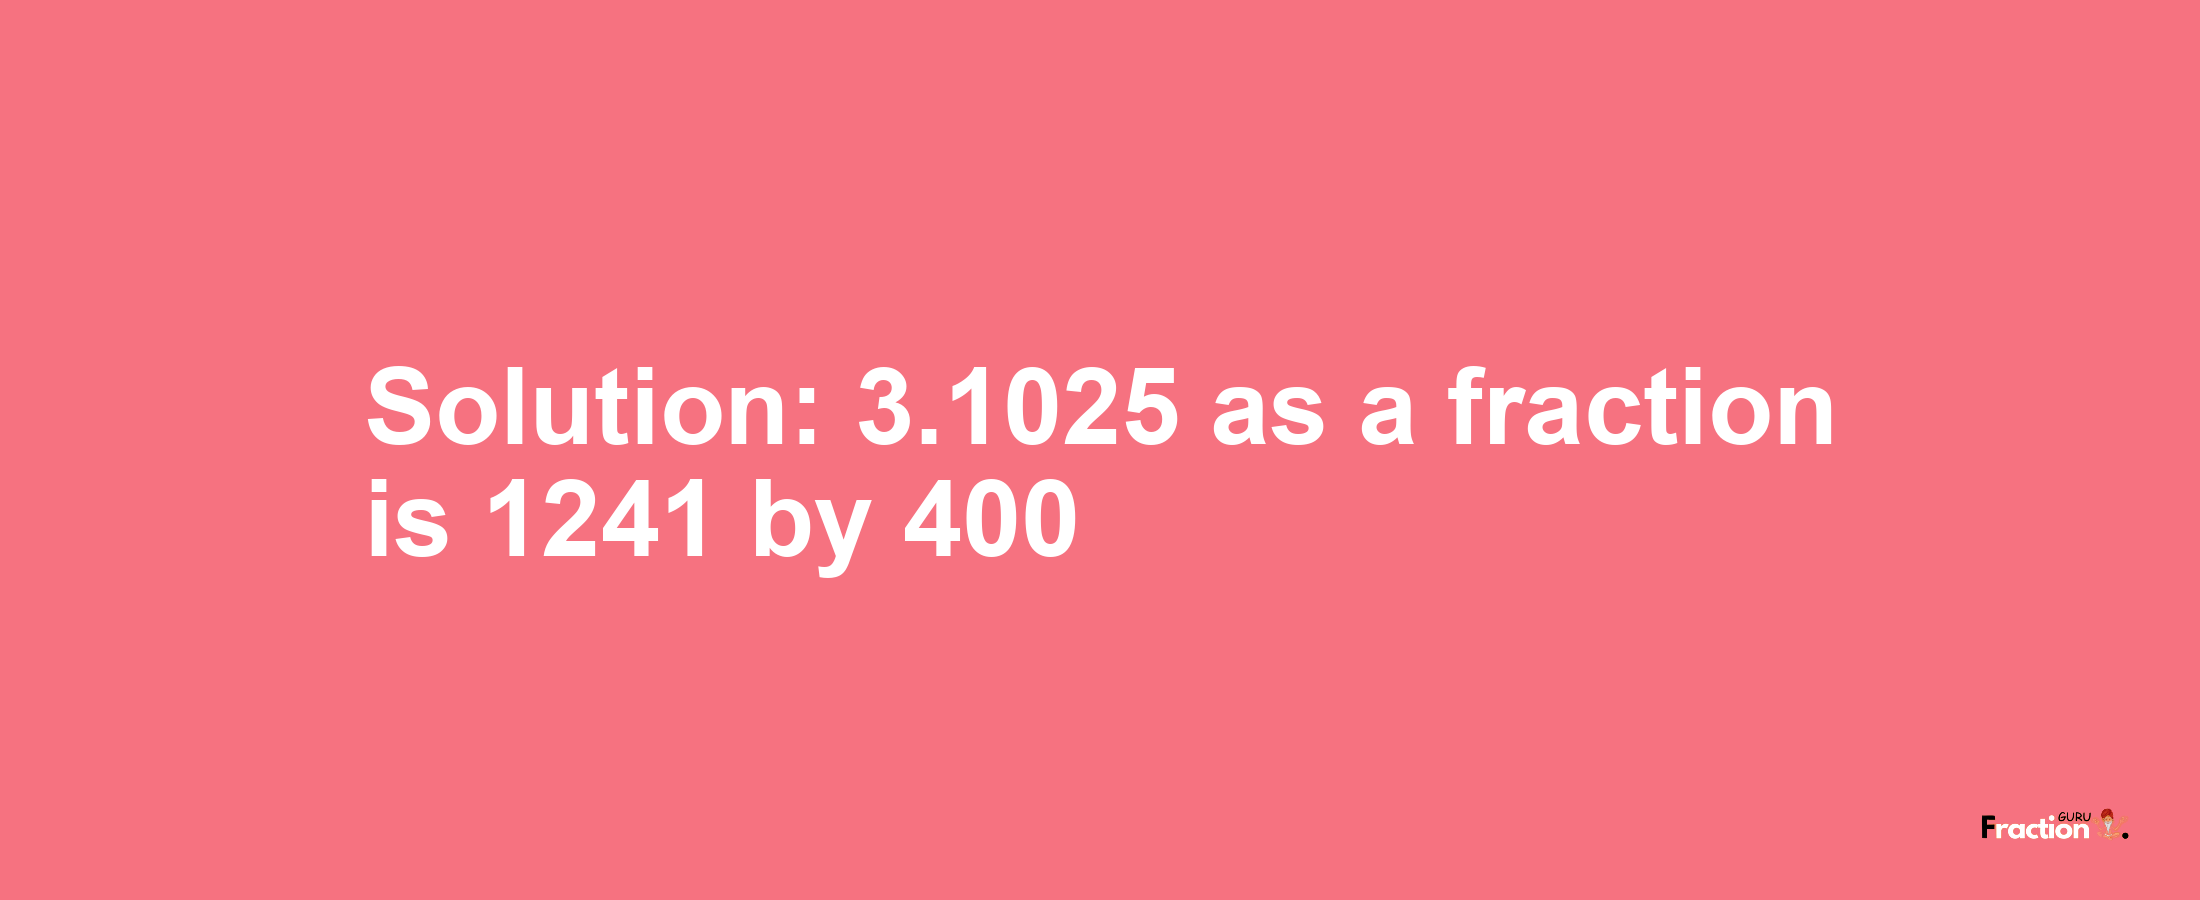 Solution:3.1025 as a fraction is 1241/400